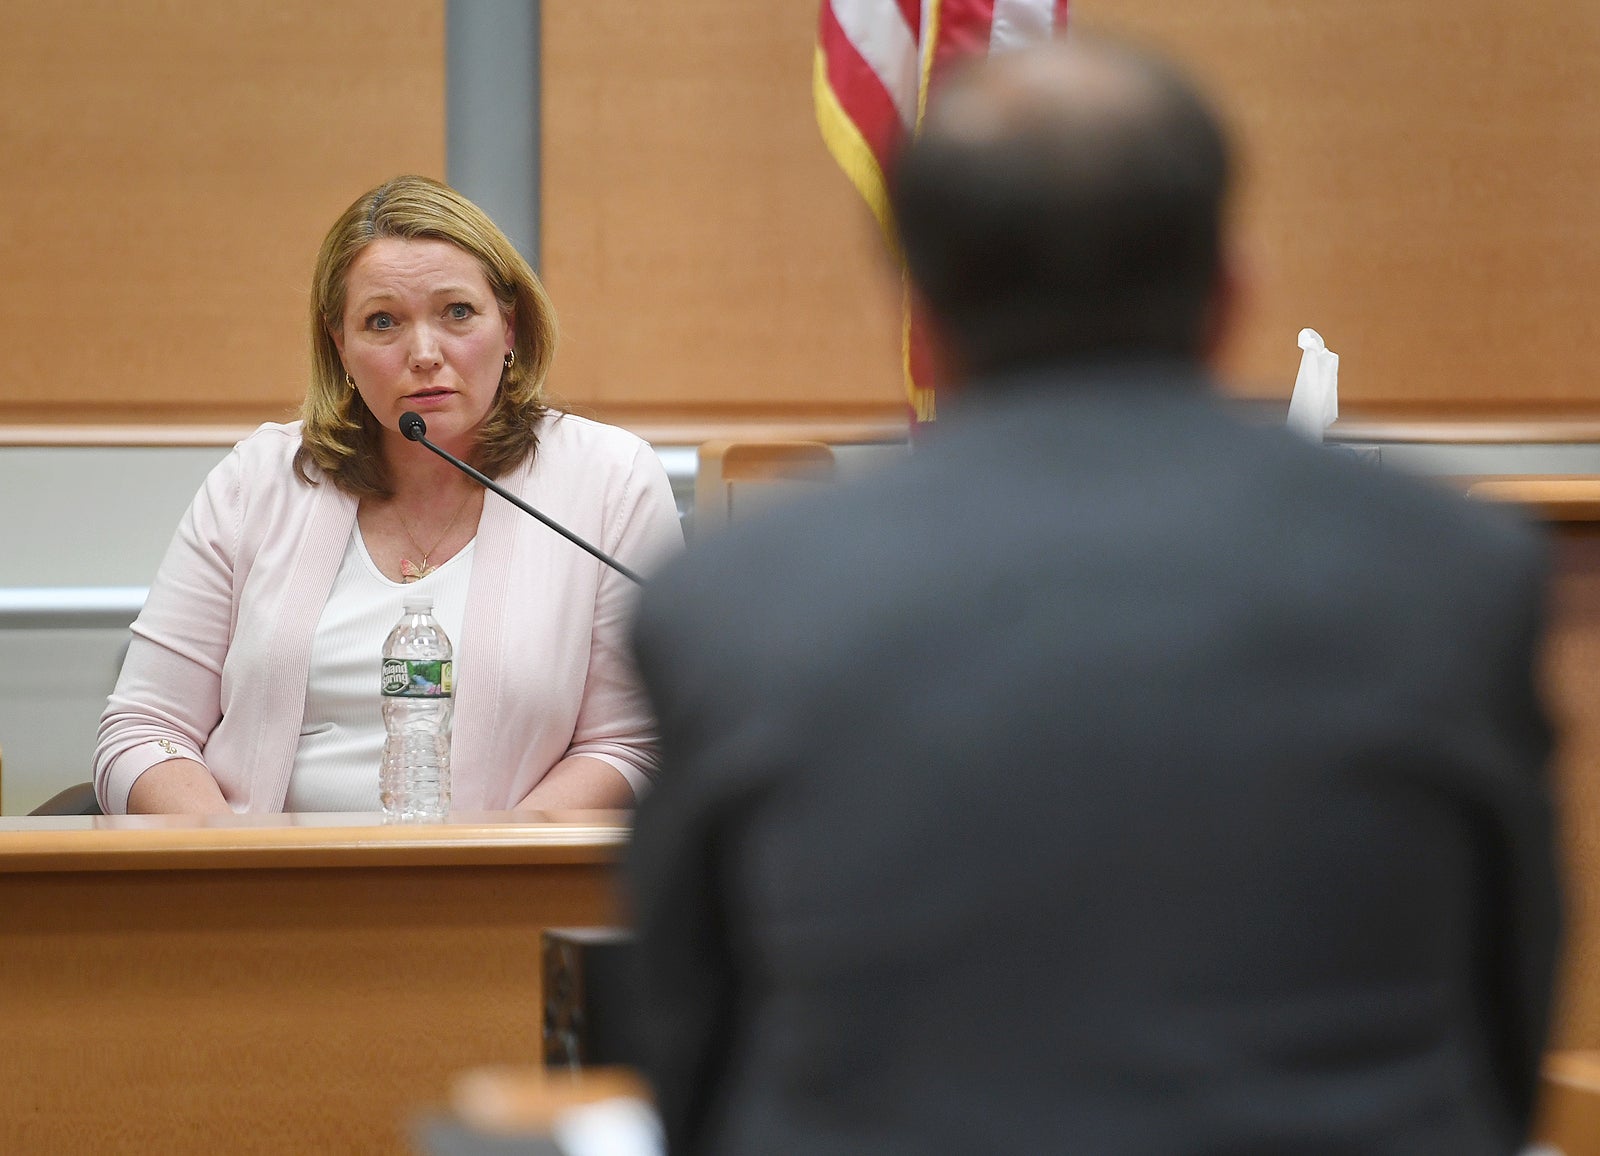 <p>Nicole Hockley, mother of deceased Sandy Hook Elementary student Dylan Hockley, answers questions from lawyer Chris Mattei during her testimony in the Alex Jones defamation trial </p>